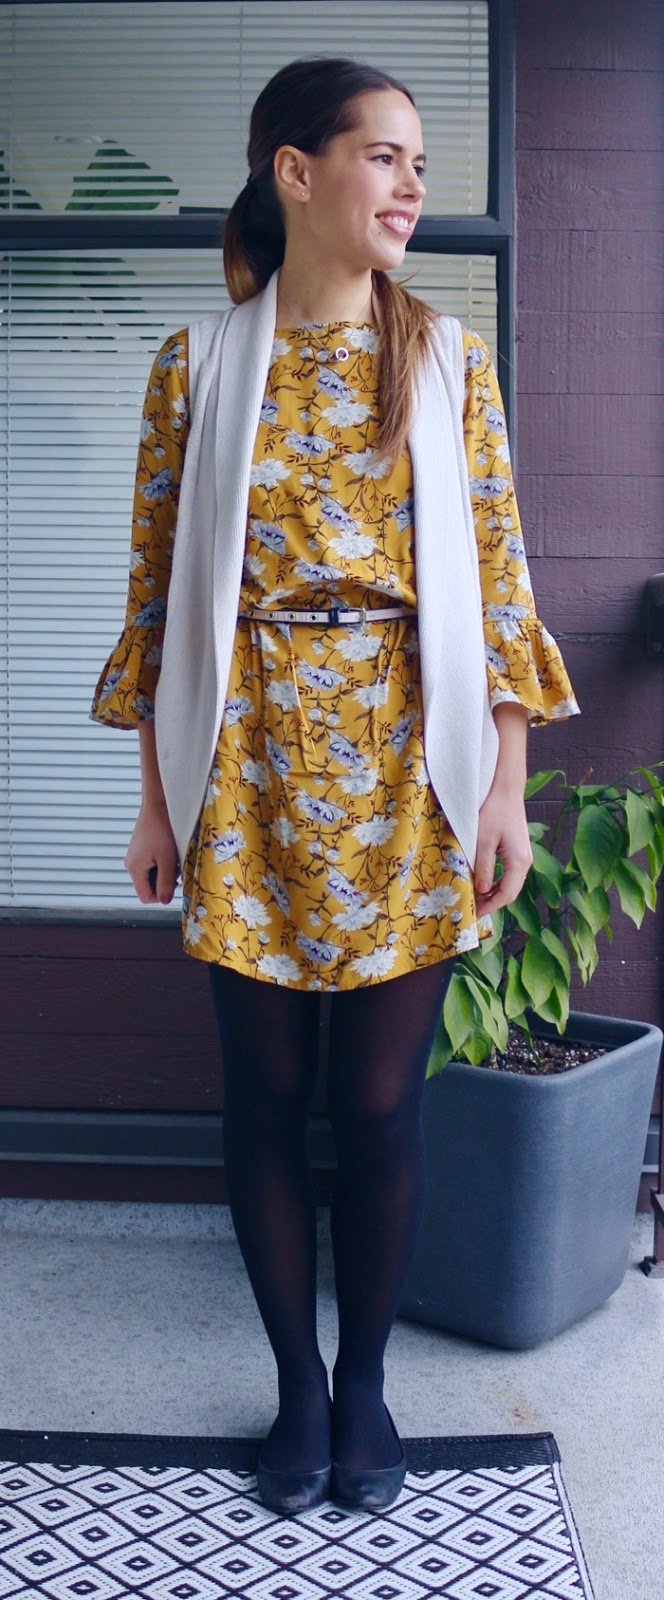 Jules in Flats - Yellow Floral Dress with Sweater Vest for Work